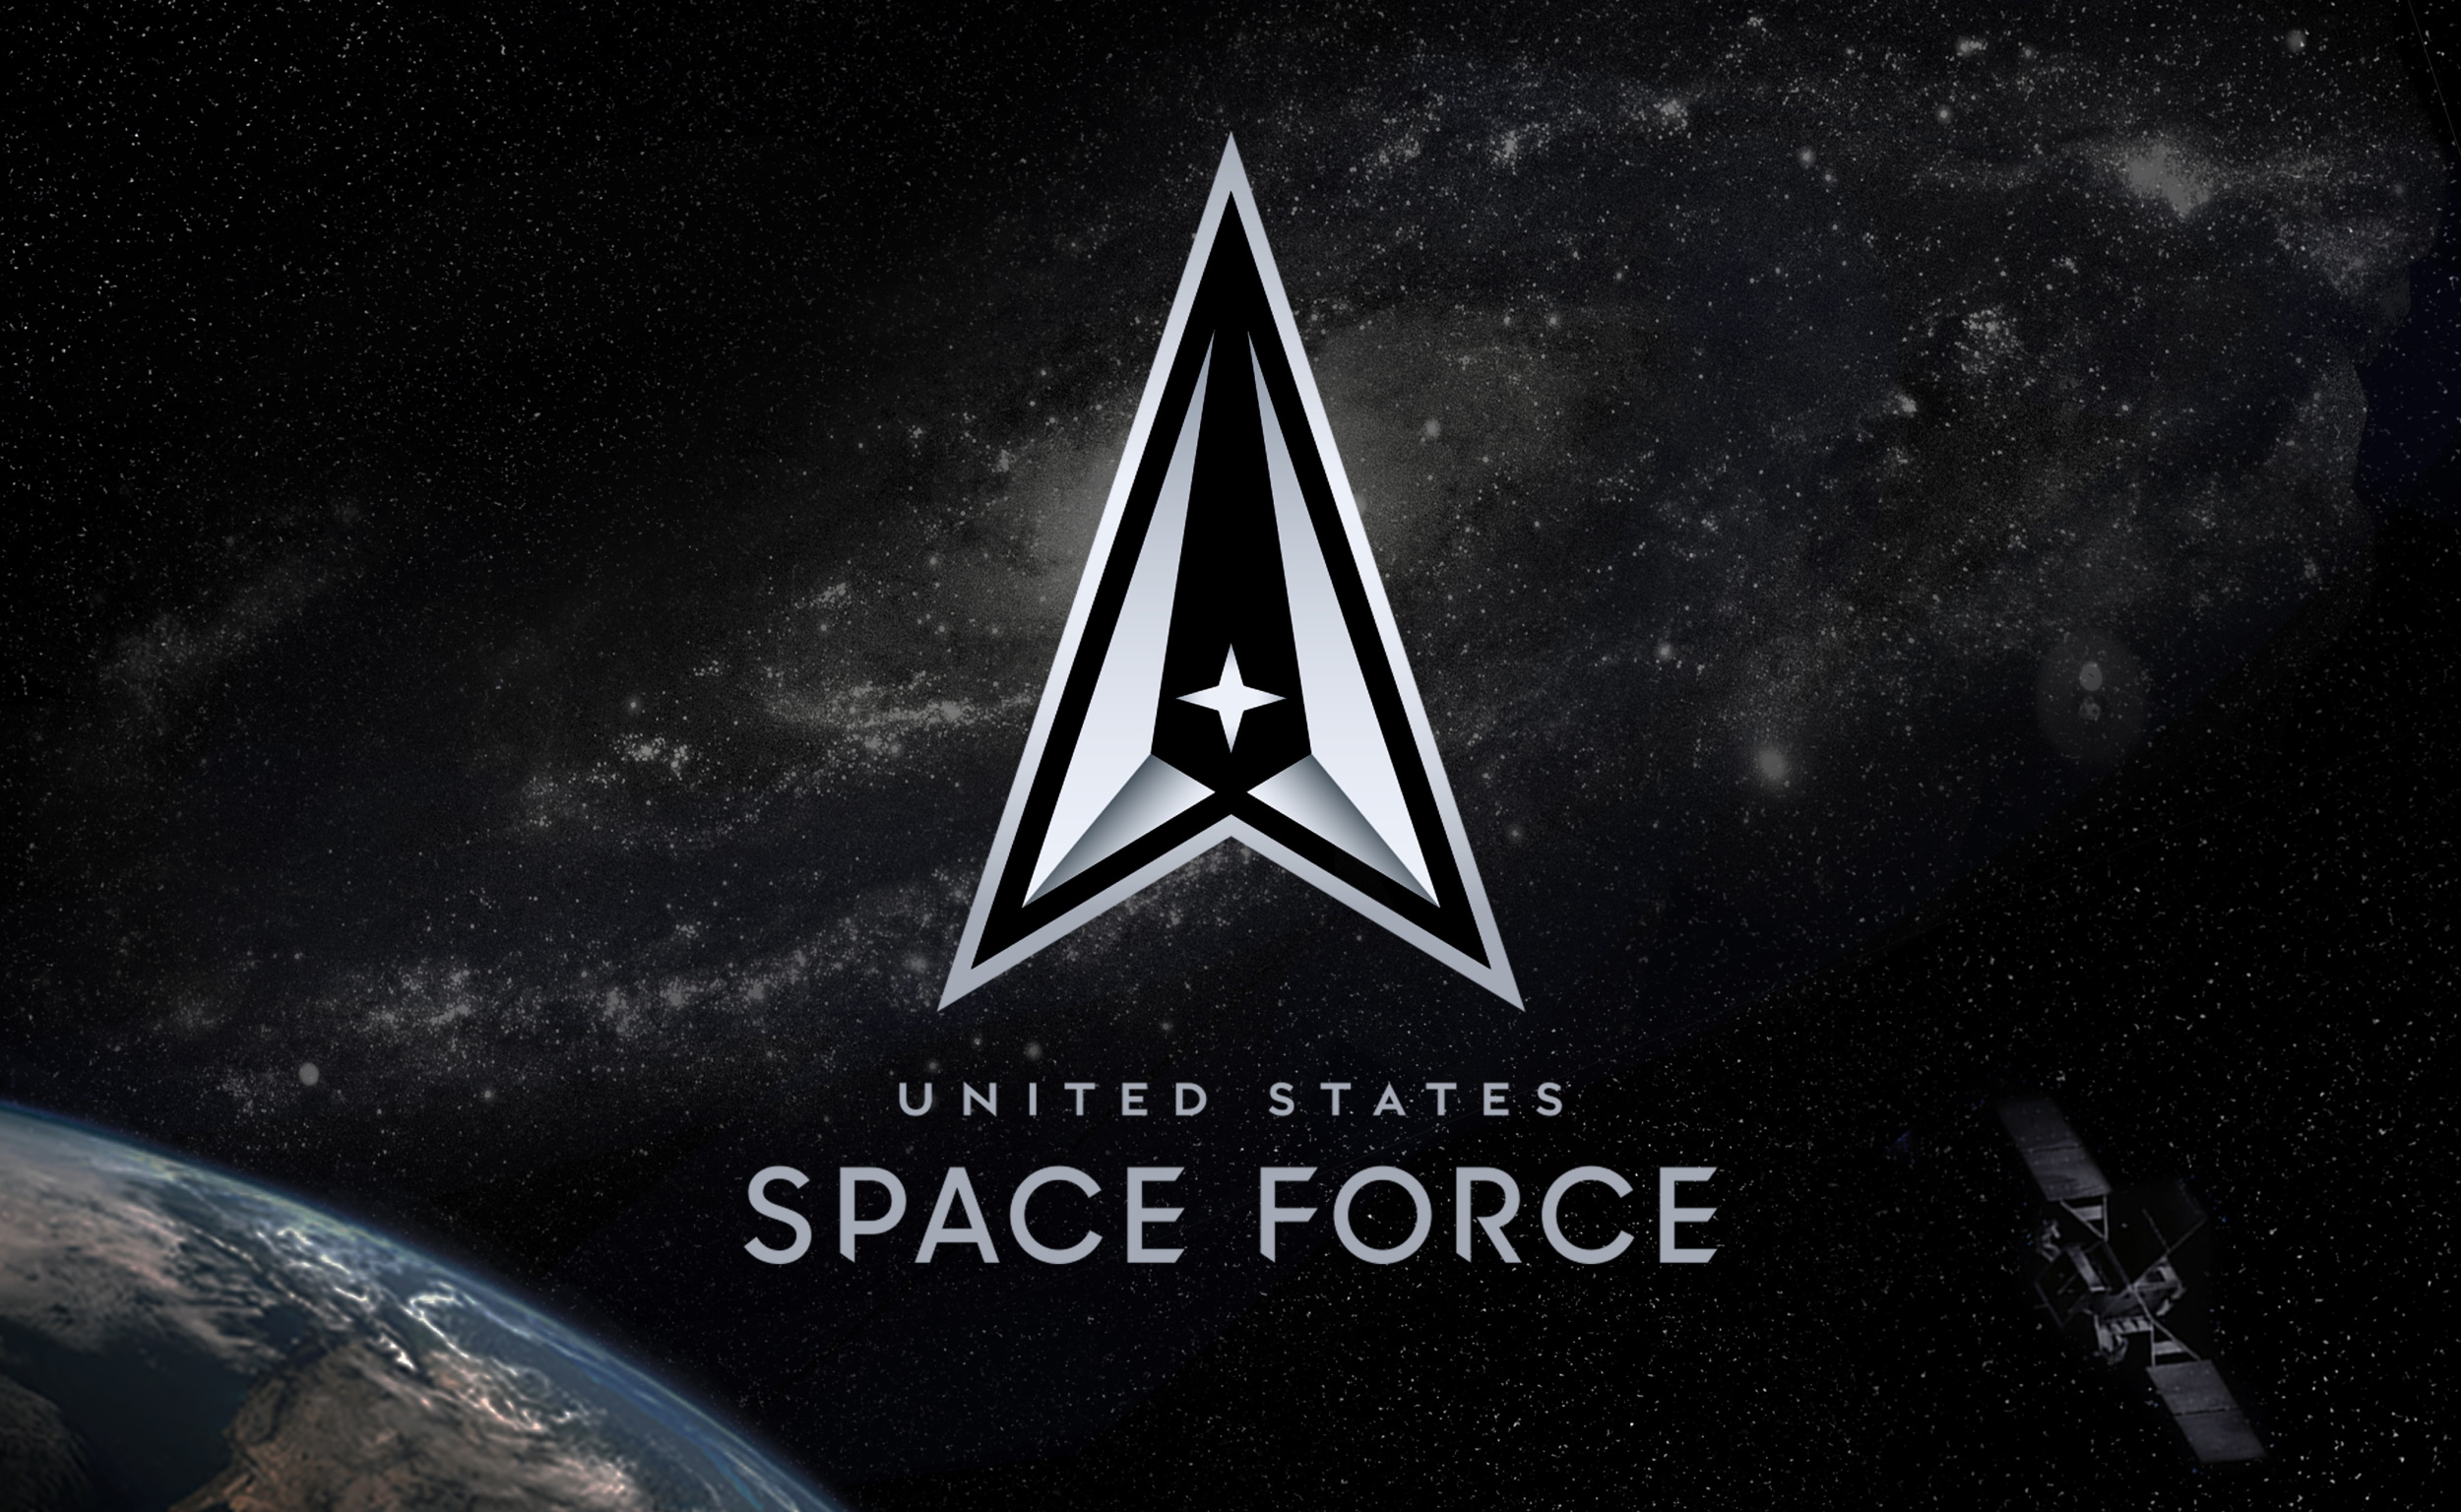 lt-gen-john-thompson-explains-how-startups-can-interact-with-the-space-force